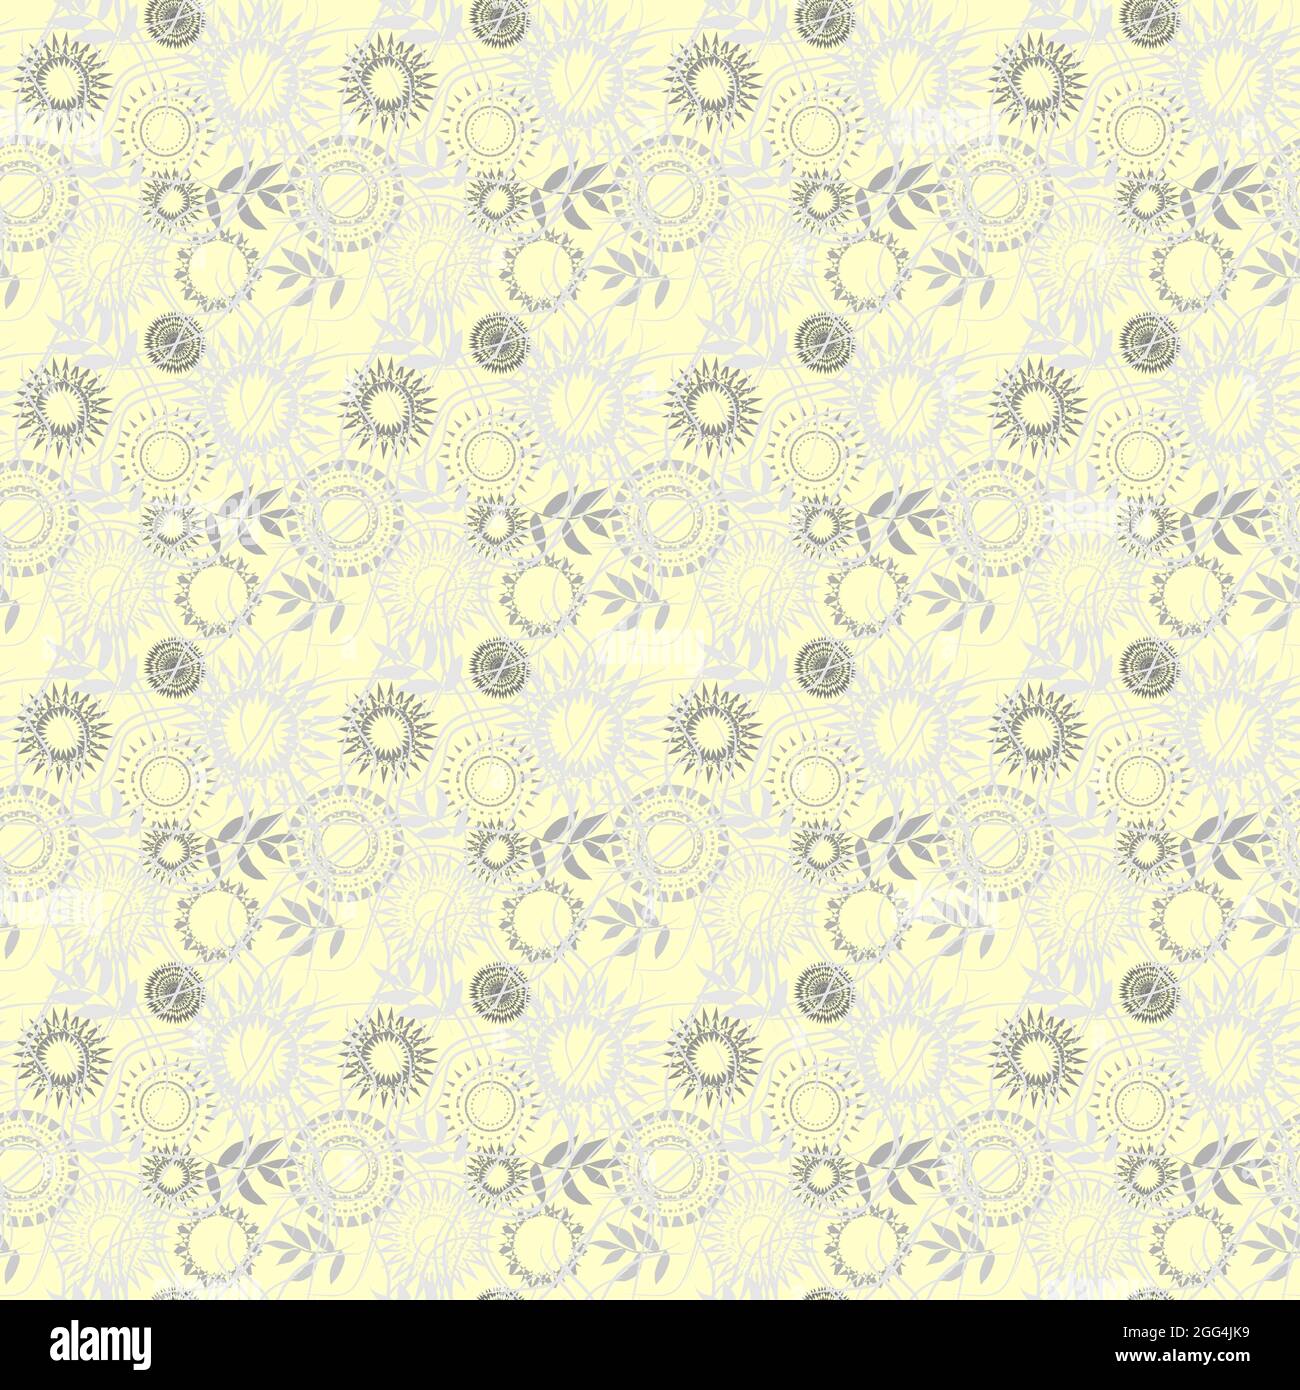 Abstract Geometric Seamless Patterns vector EPS file for web, print, wallpaper, gift wrapping, home decor, fashion, invitation background, textile des Stock Vector